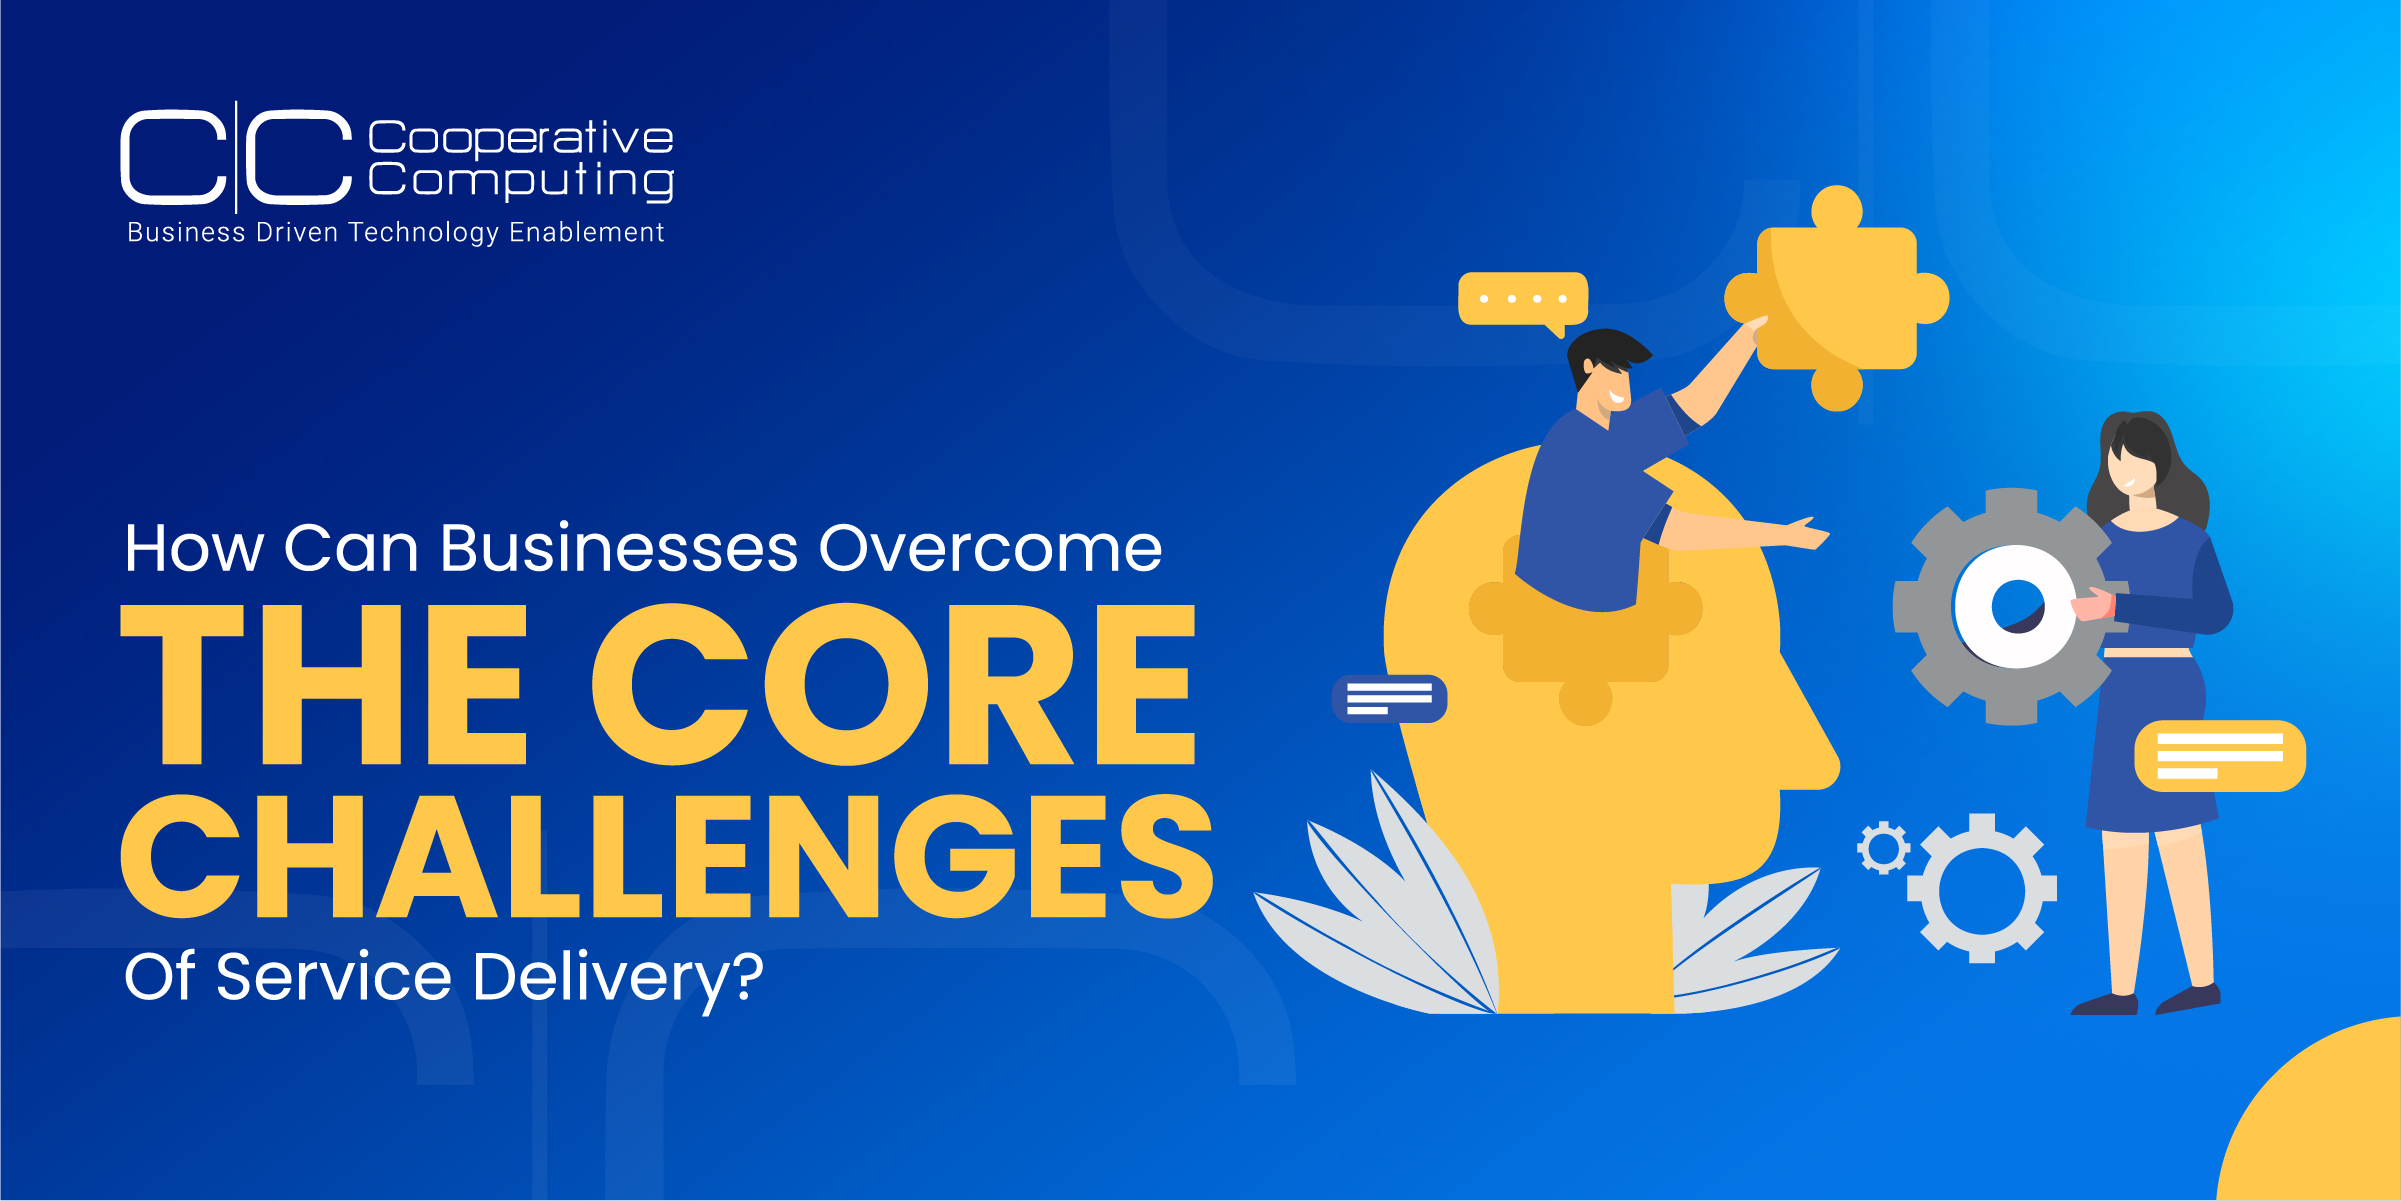 6 Key Service Delivery Challenges for Businesses and How to Overcome Them